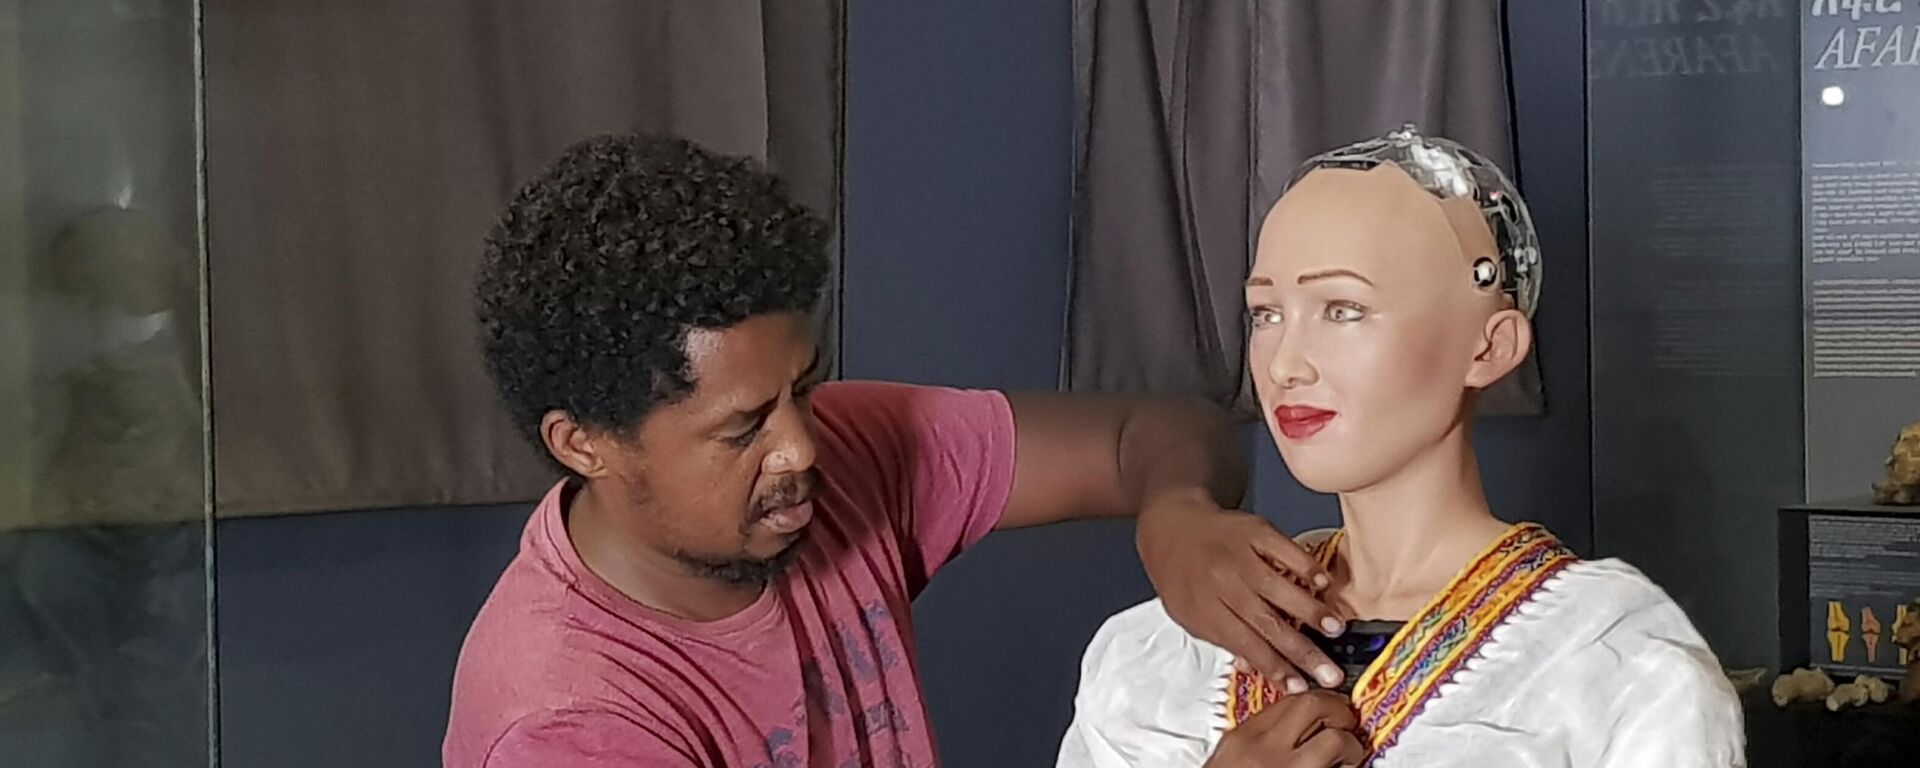 In this photo of Monday July 2, 2018, Getnet Assefa, the Founder and CEO of iCog Labs is photographed with humanoid robot Sophia at the Ethiopian National Museum in Addis Ababa. - Sputnik Africa, 1920, 31.12.2023